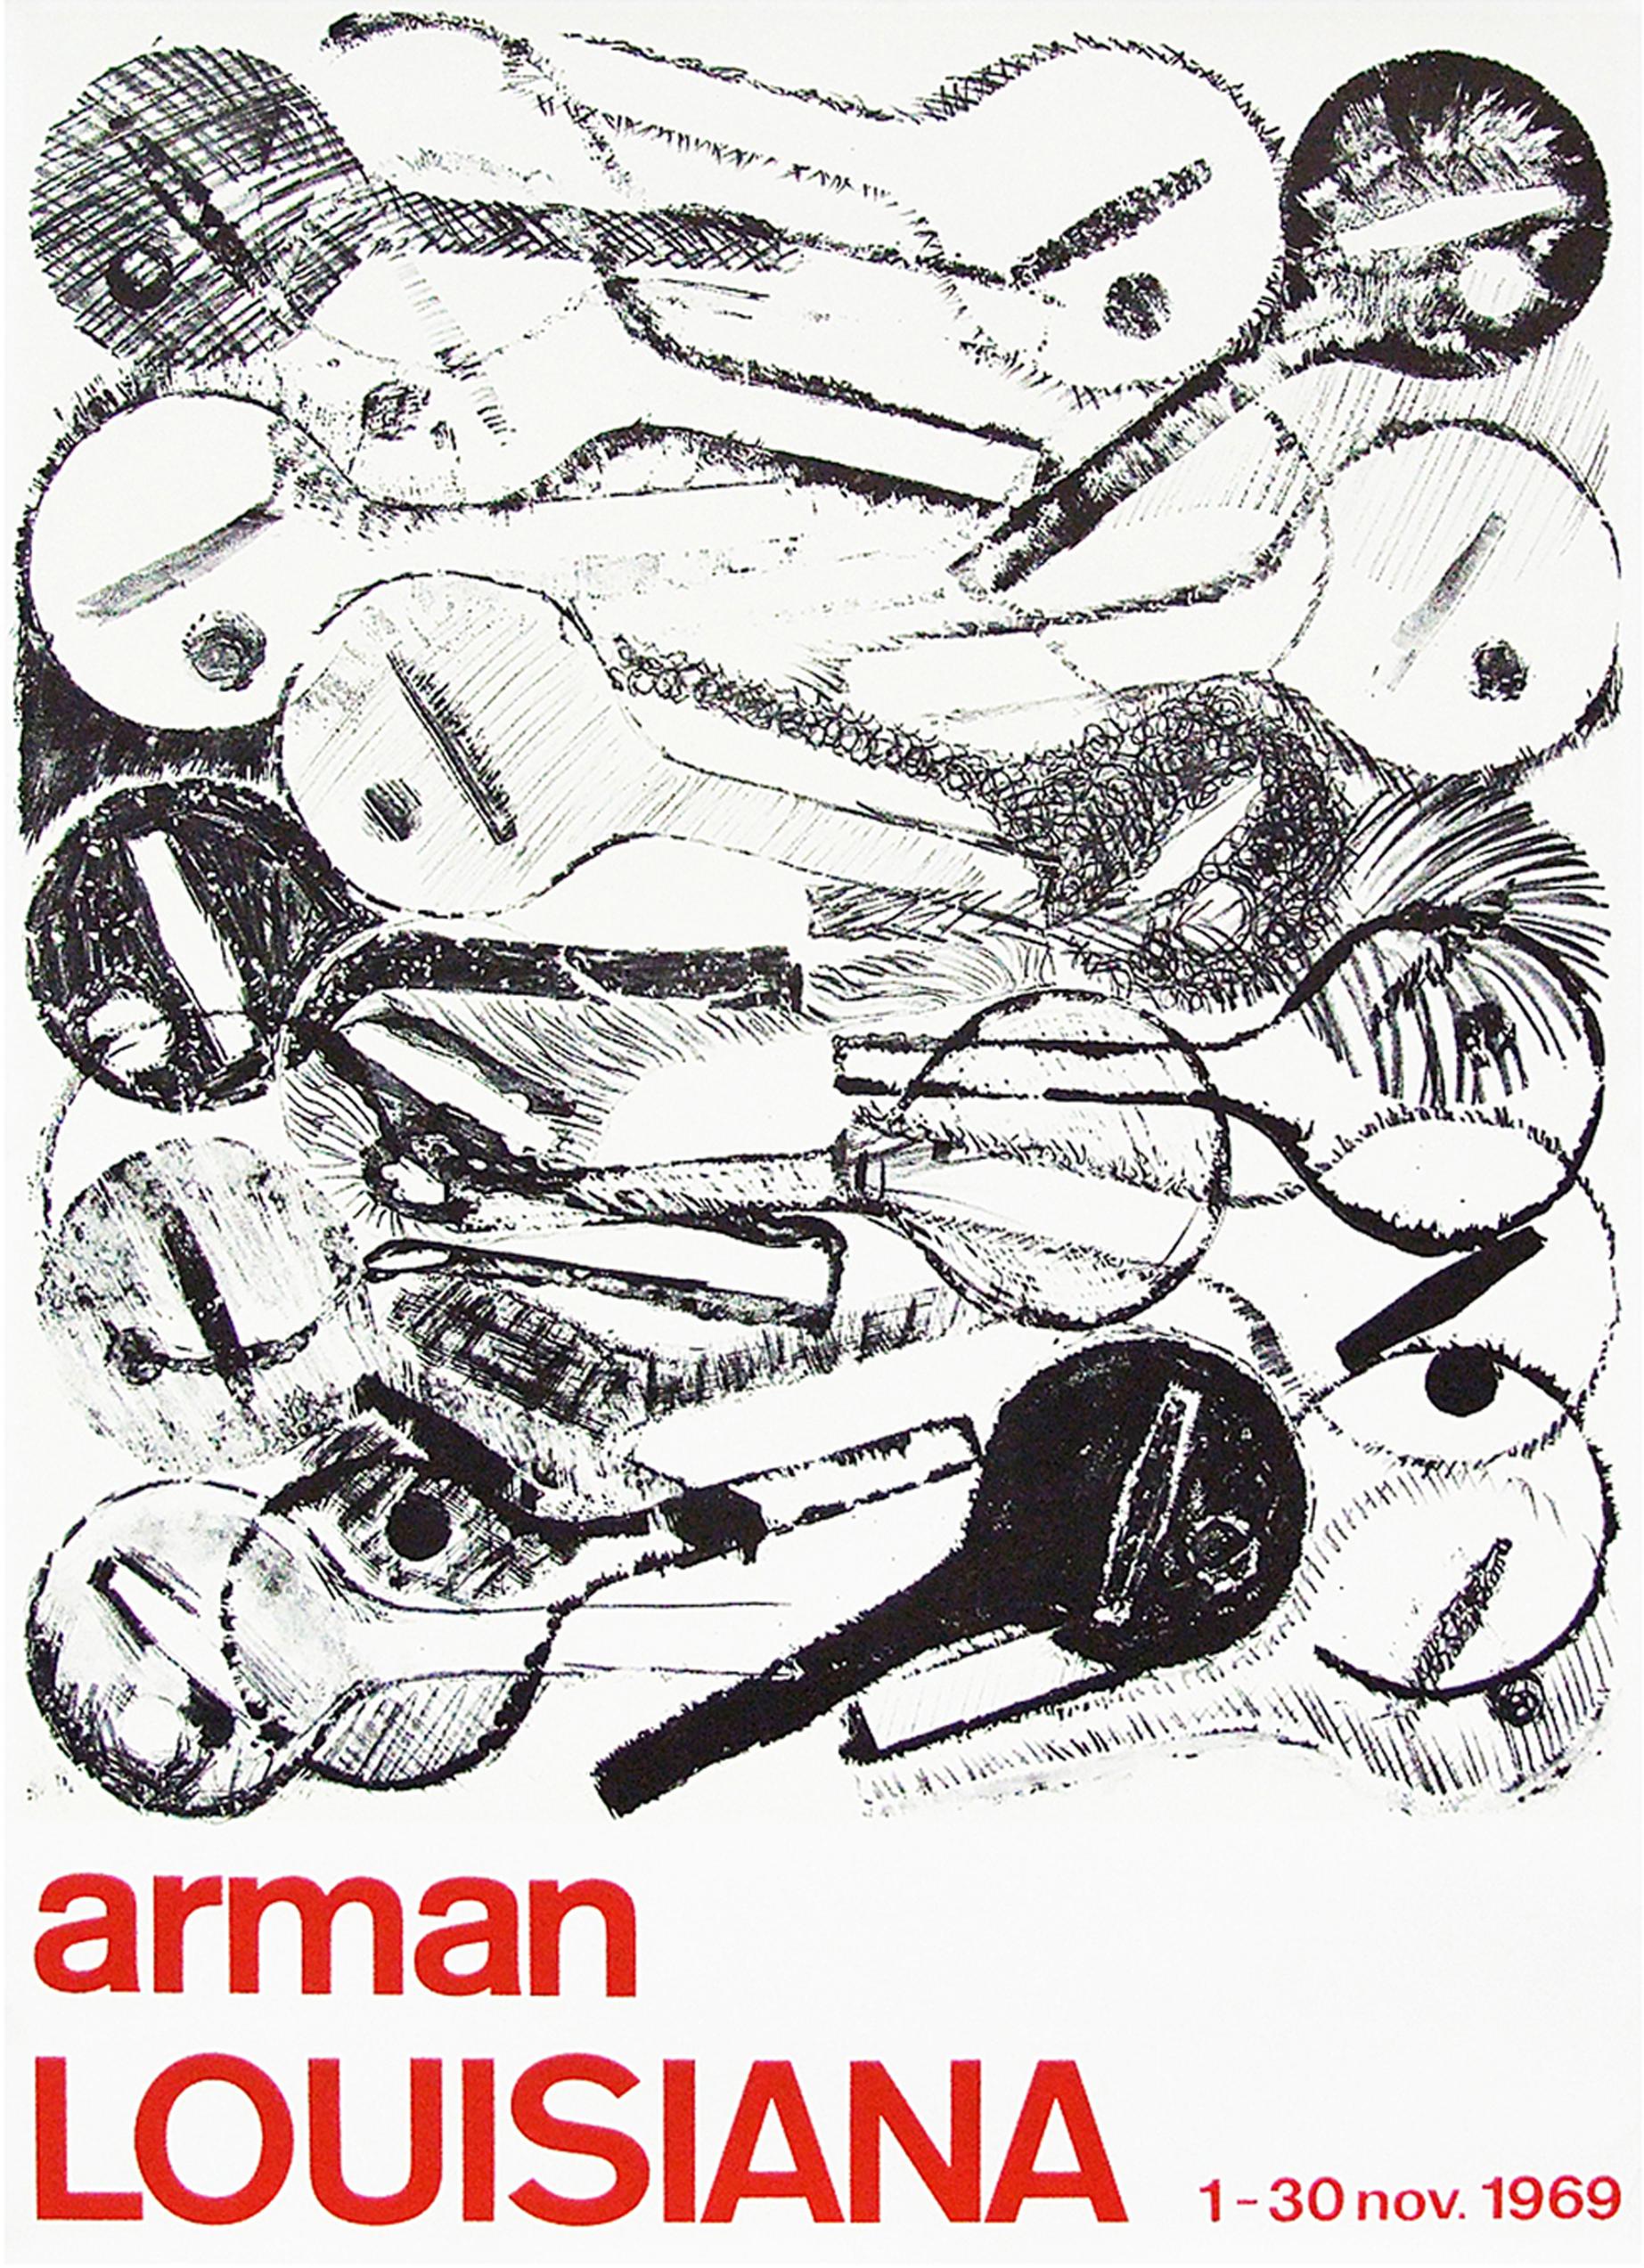 Original 1969 promotional poster for the Arman exhibition at the Louisiana Museum, Denmark. Slight crease to the bottom right hand corner (see photo)

Printed by Atelier Clot, Bramsen et Georges, Paris.

Rolled.

Measures: L 85cm x W 62cm.